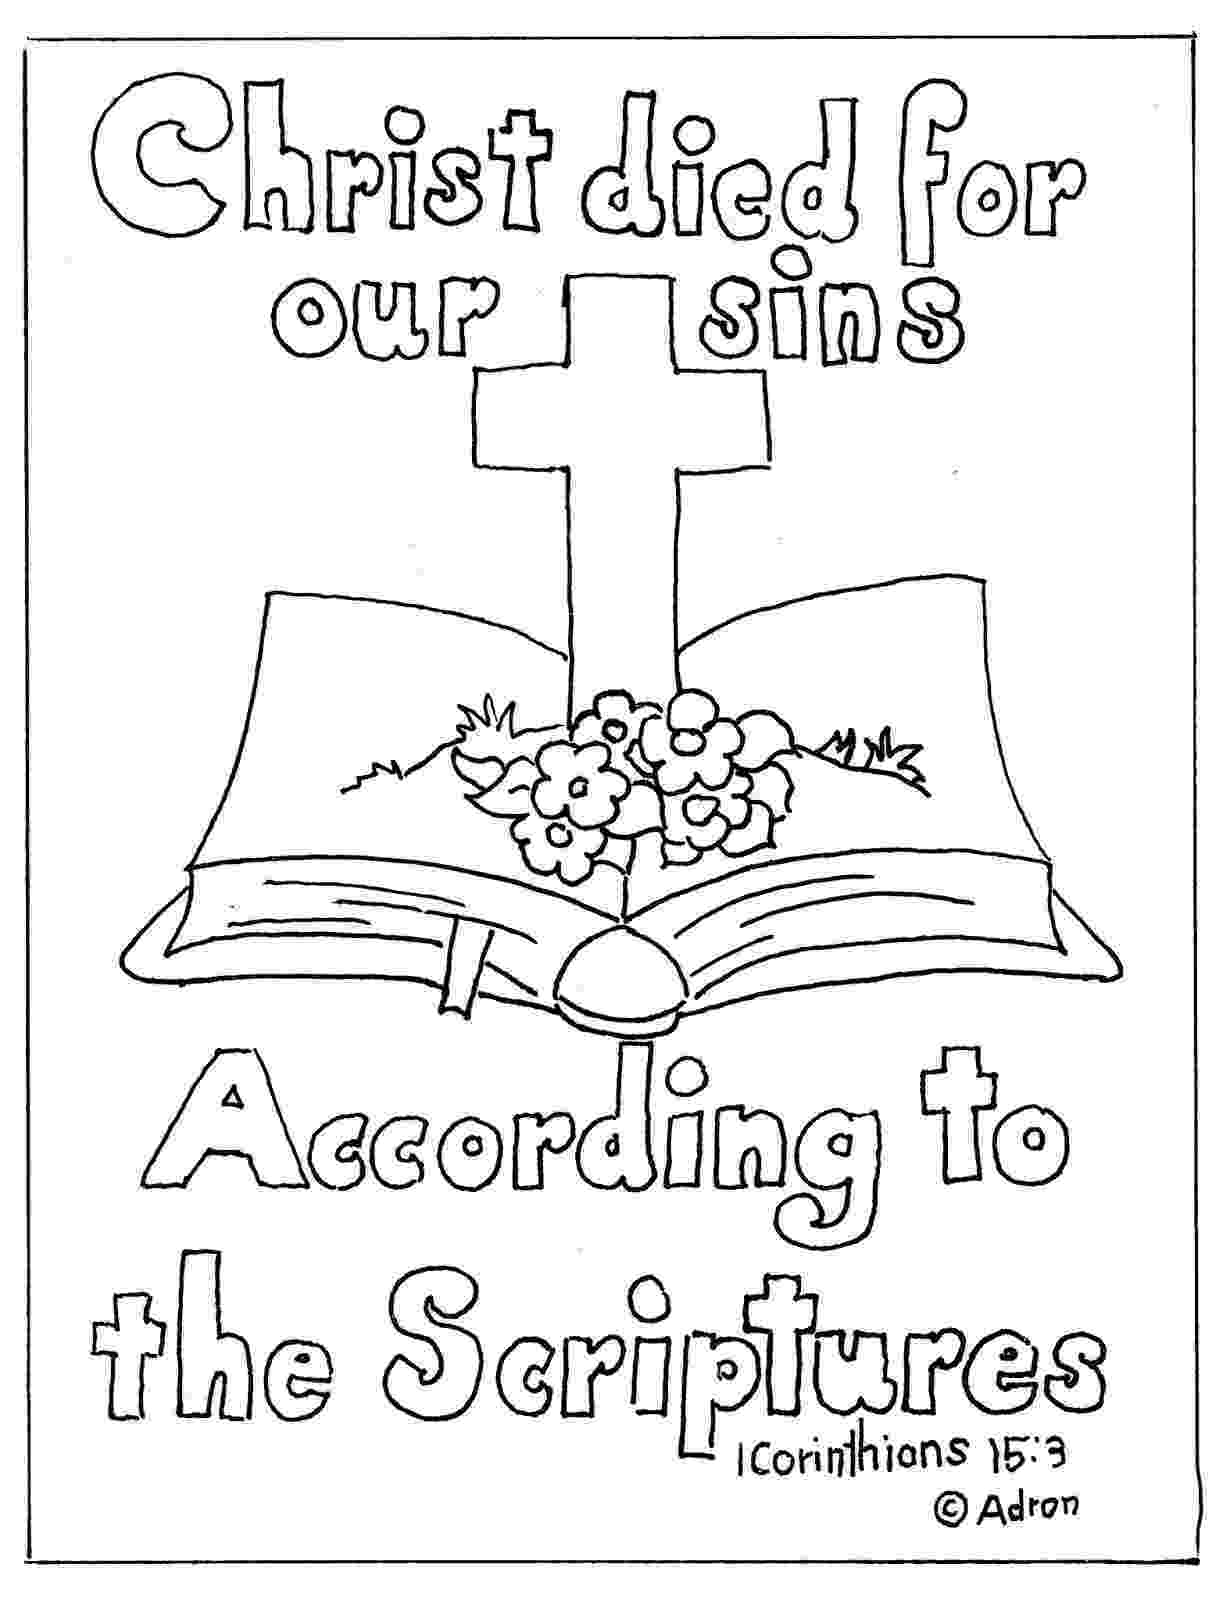 awana sparks coloring pages awana sparky coloring pages what is sparks anyway sparks awana pages coloring 